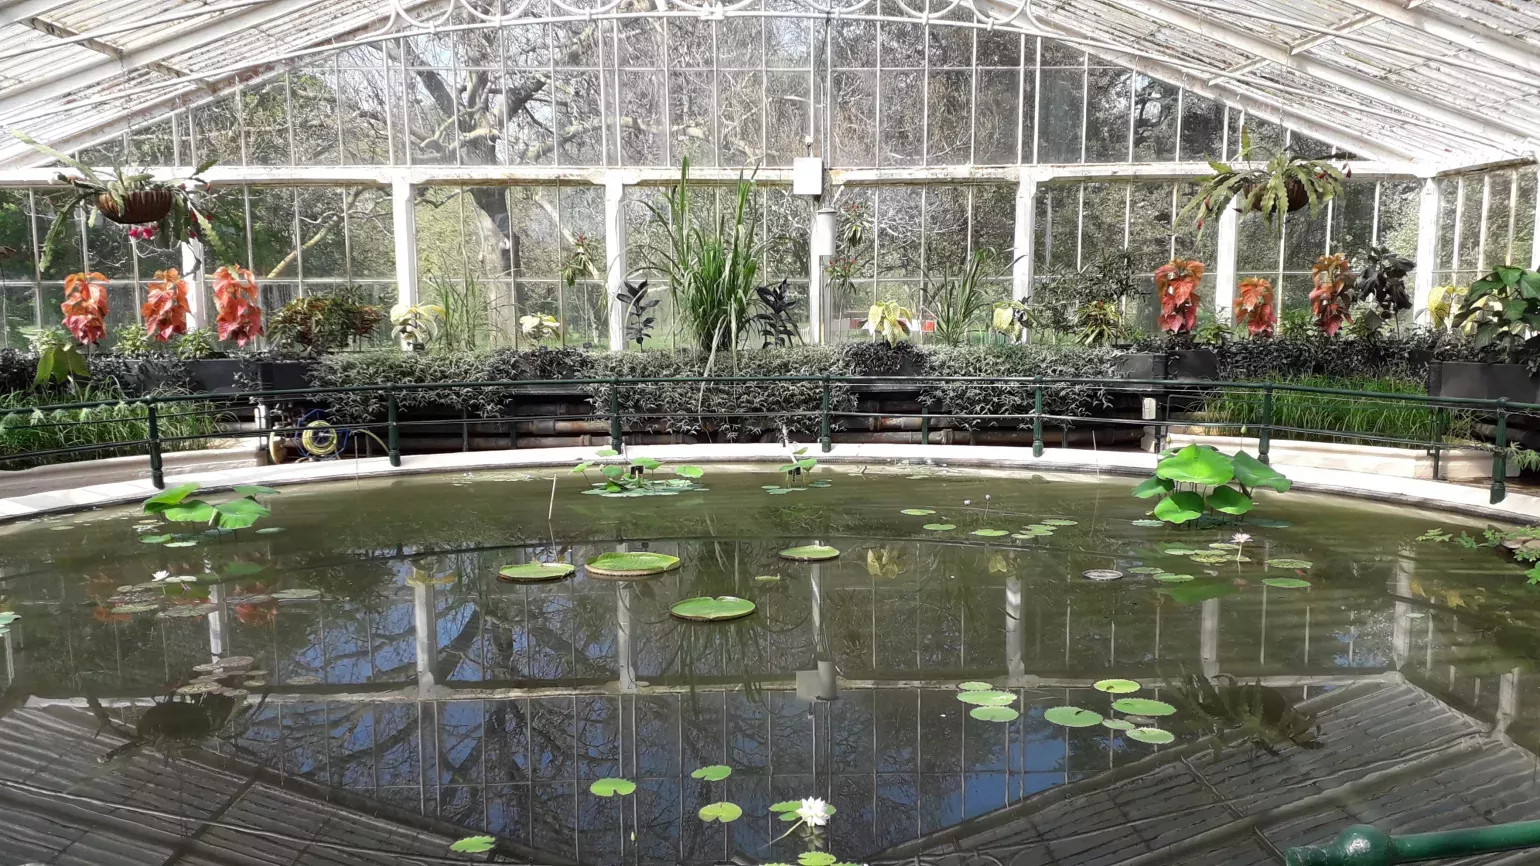 Growing giant waterlilies in the Waterlily House